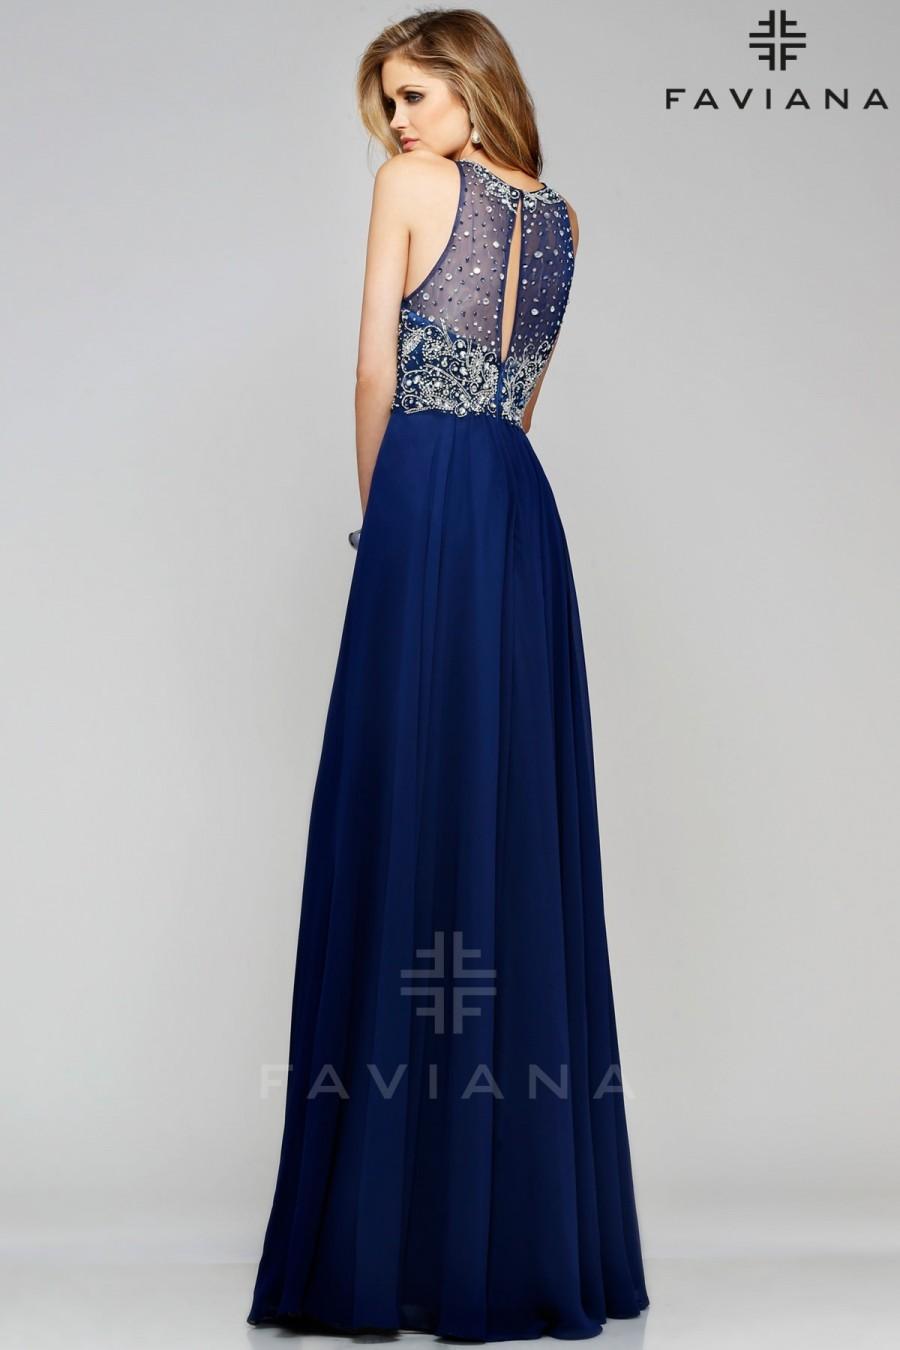 Wedding - Faviana S7560 Beaded Chiffon Evening Gown - 2016 Spring Trends Dresses